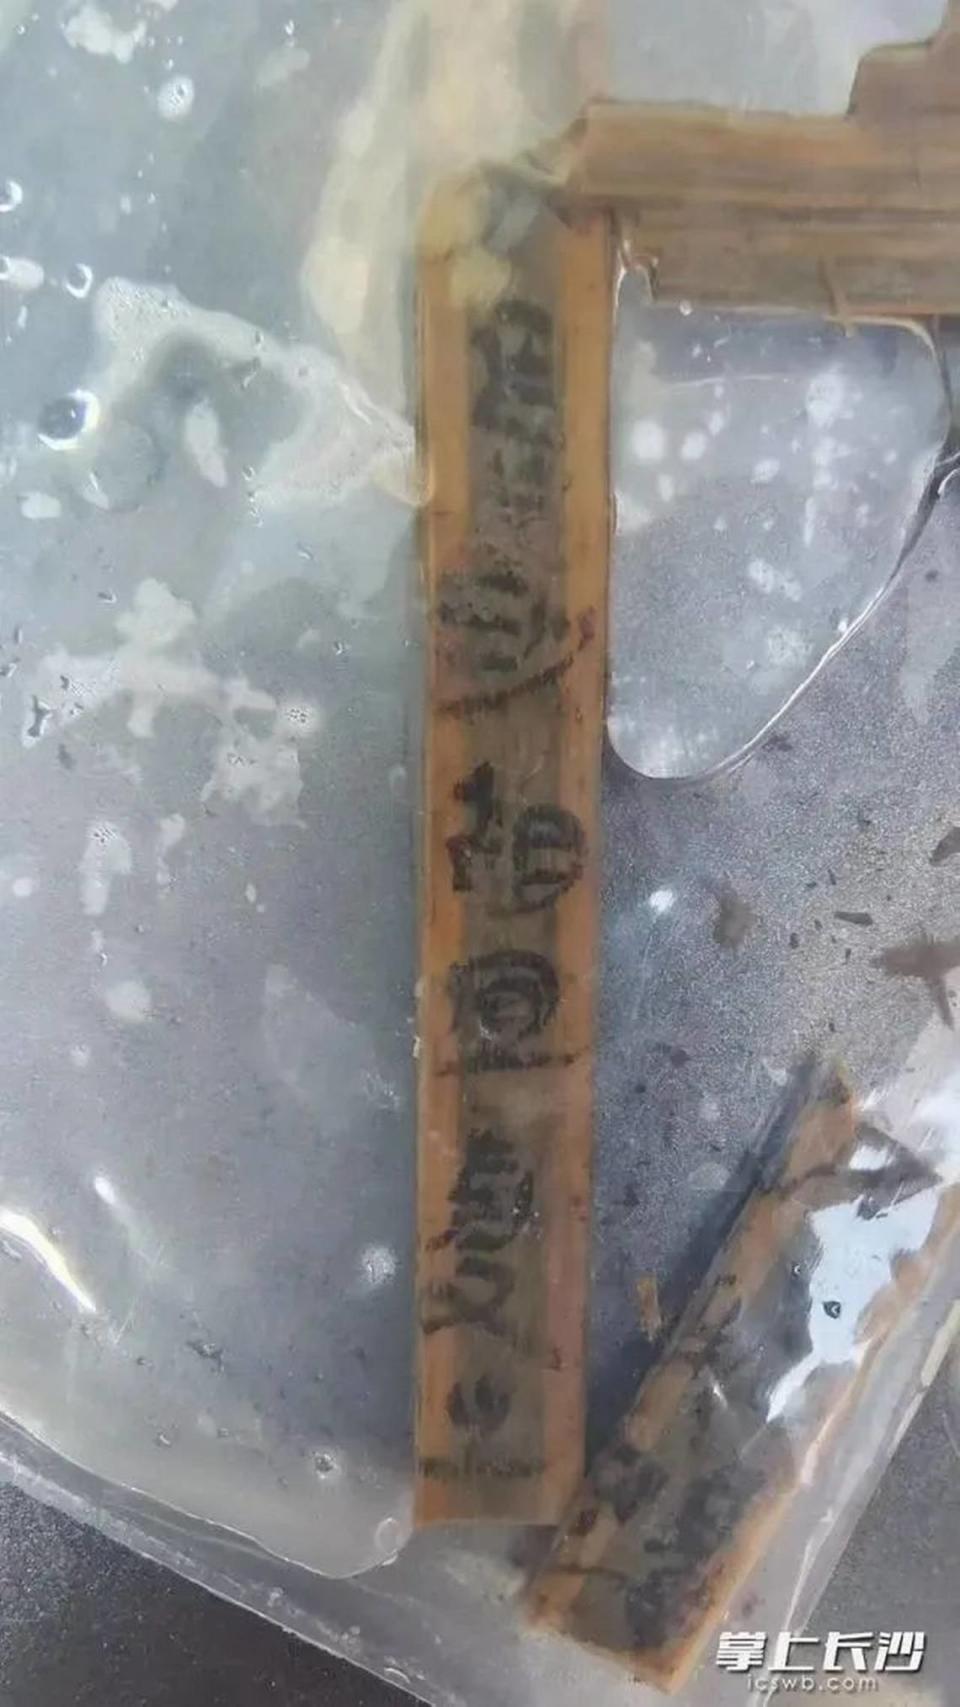 Some of the 1,700-year-old bamboo slips, or official records, found in Changsha.